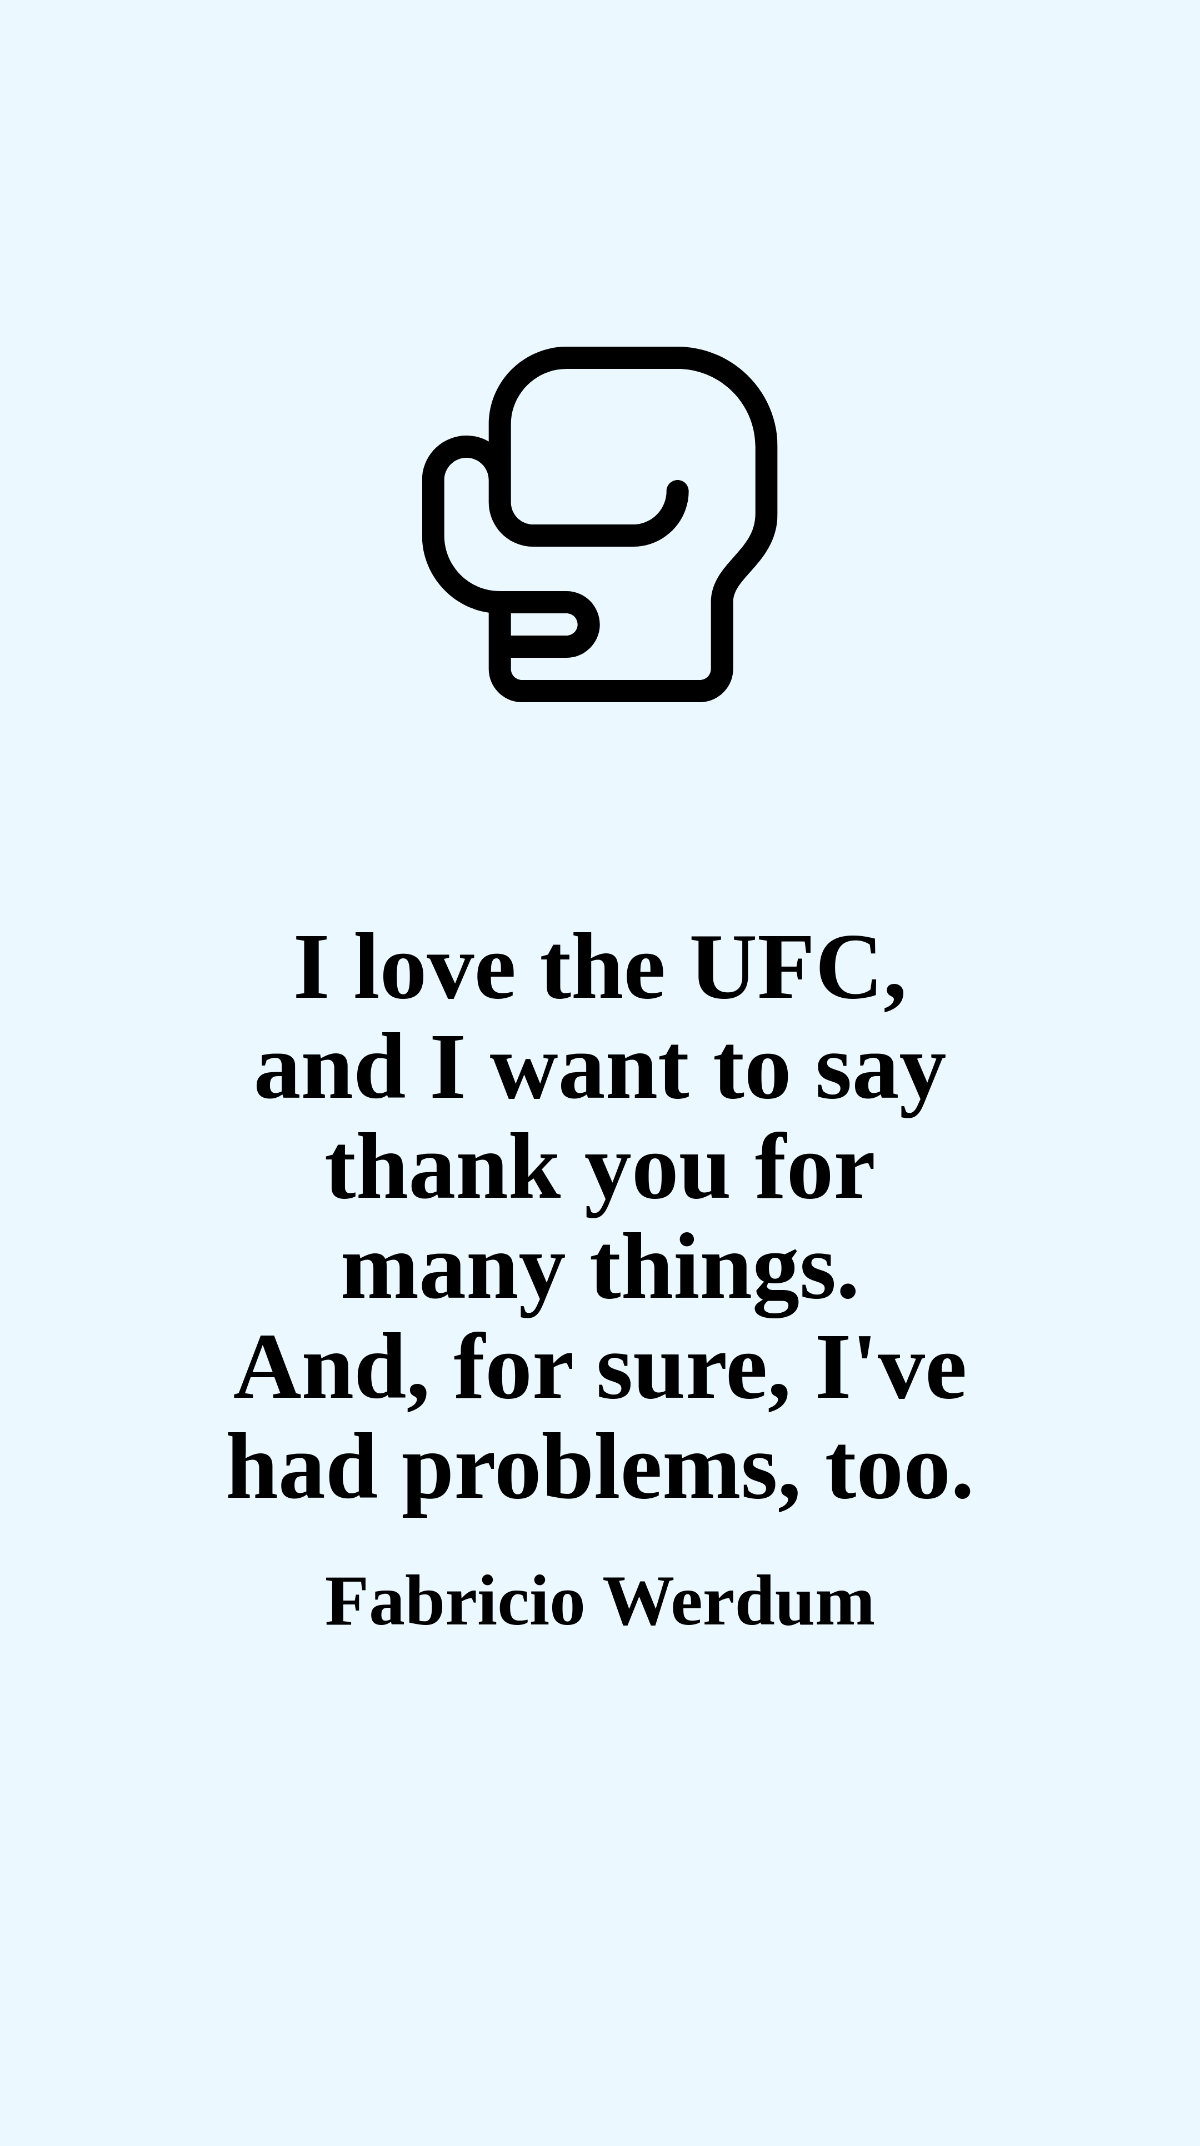 Fabricio Werdum - I love the UFC, and I want to say thank you for many things. And, for sure, I've had problems, too. Template